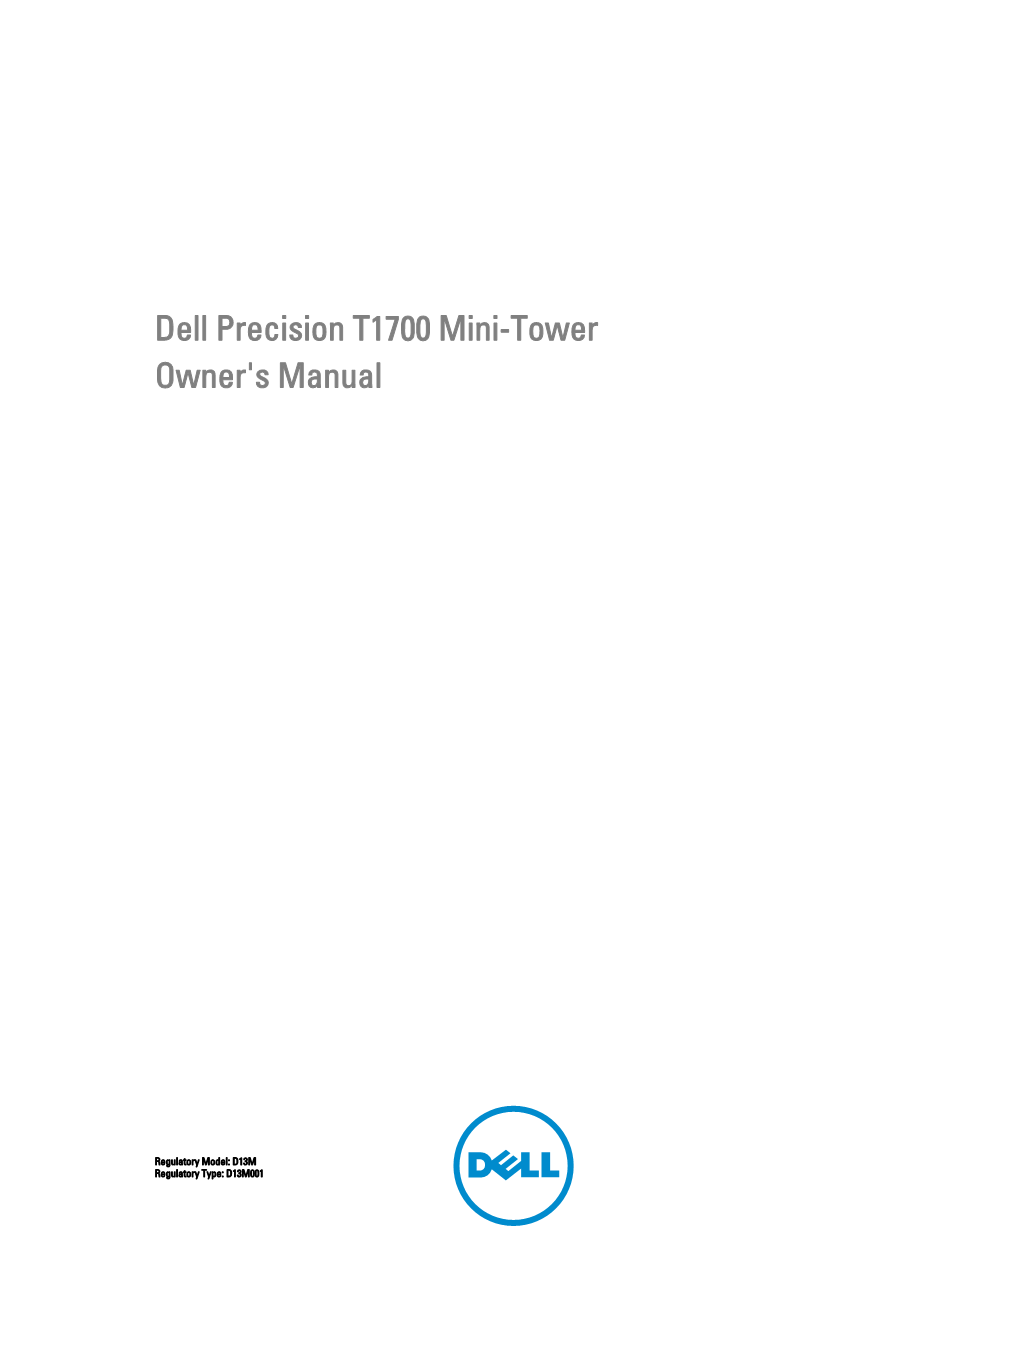 Dell Precision T1700 Workstation Owner's Manual